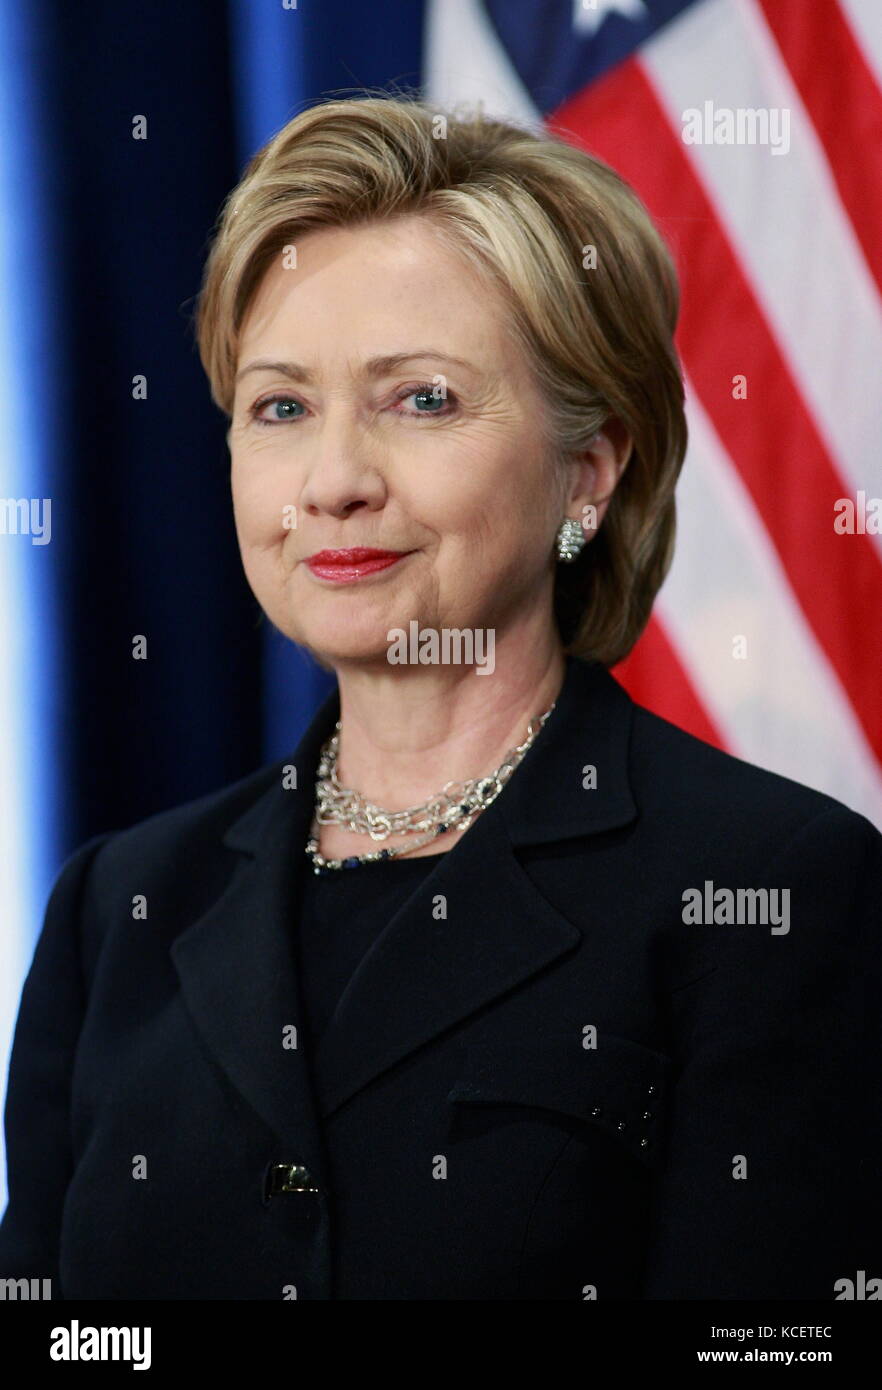 Hillary Diane Rodham Clinton (born October 26, 1947) is an American politician who served as the 67th United States Secretary of State from 2009 to 2013, and was the Democratic Party's nominee for President of the United States in the 2016 election Stock Photo